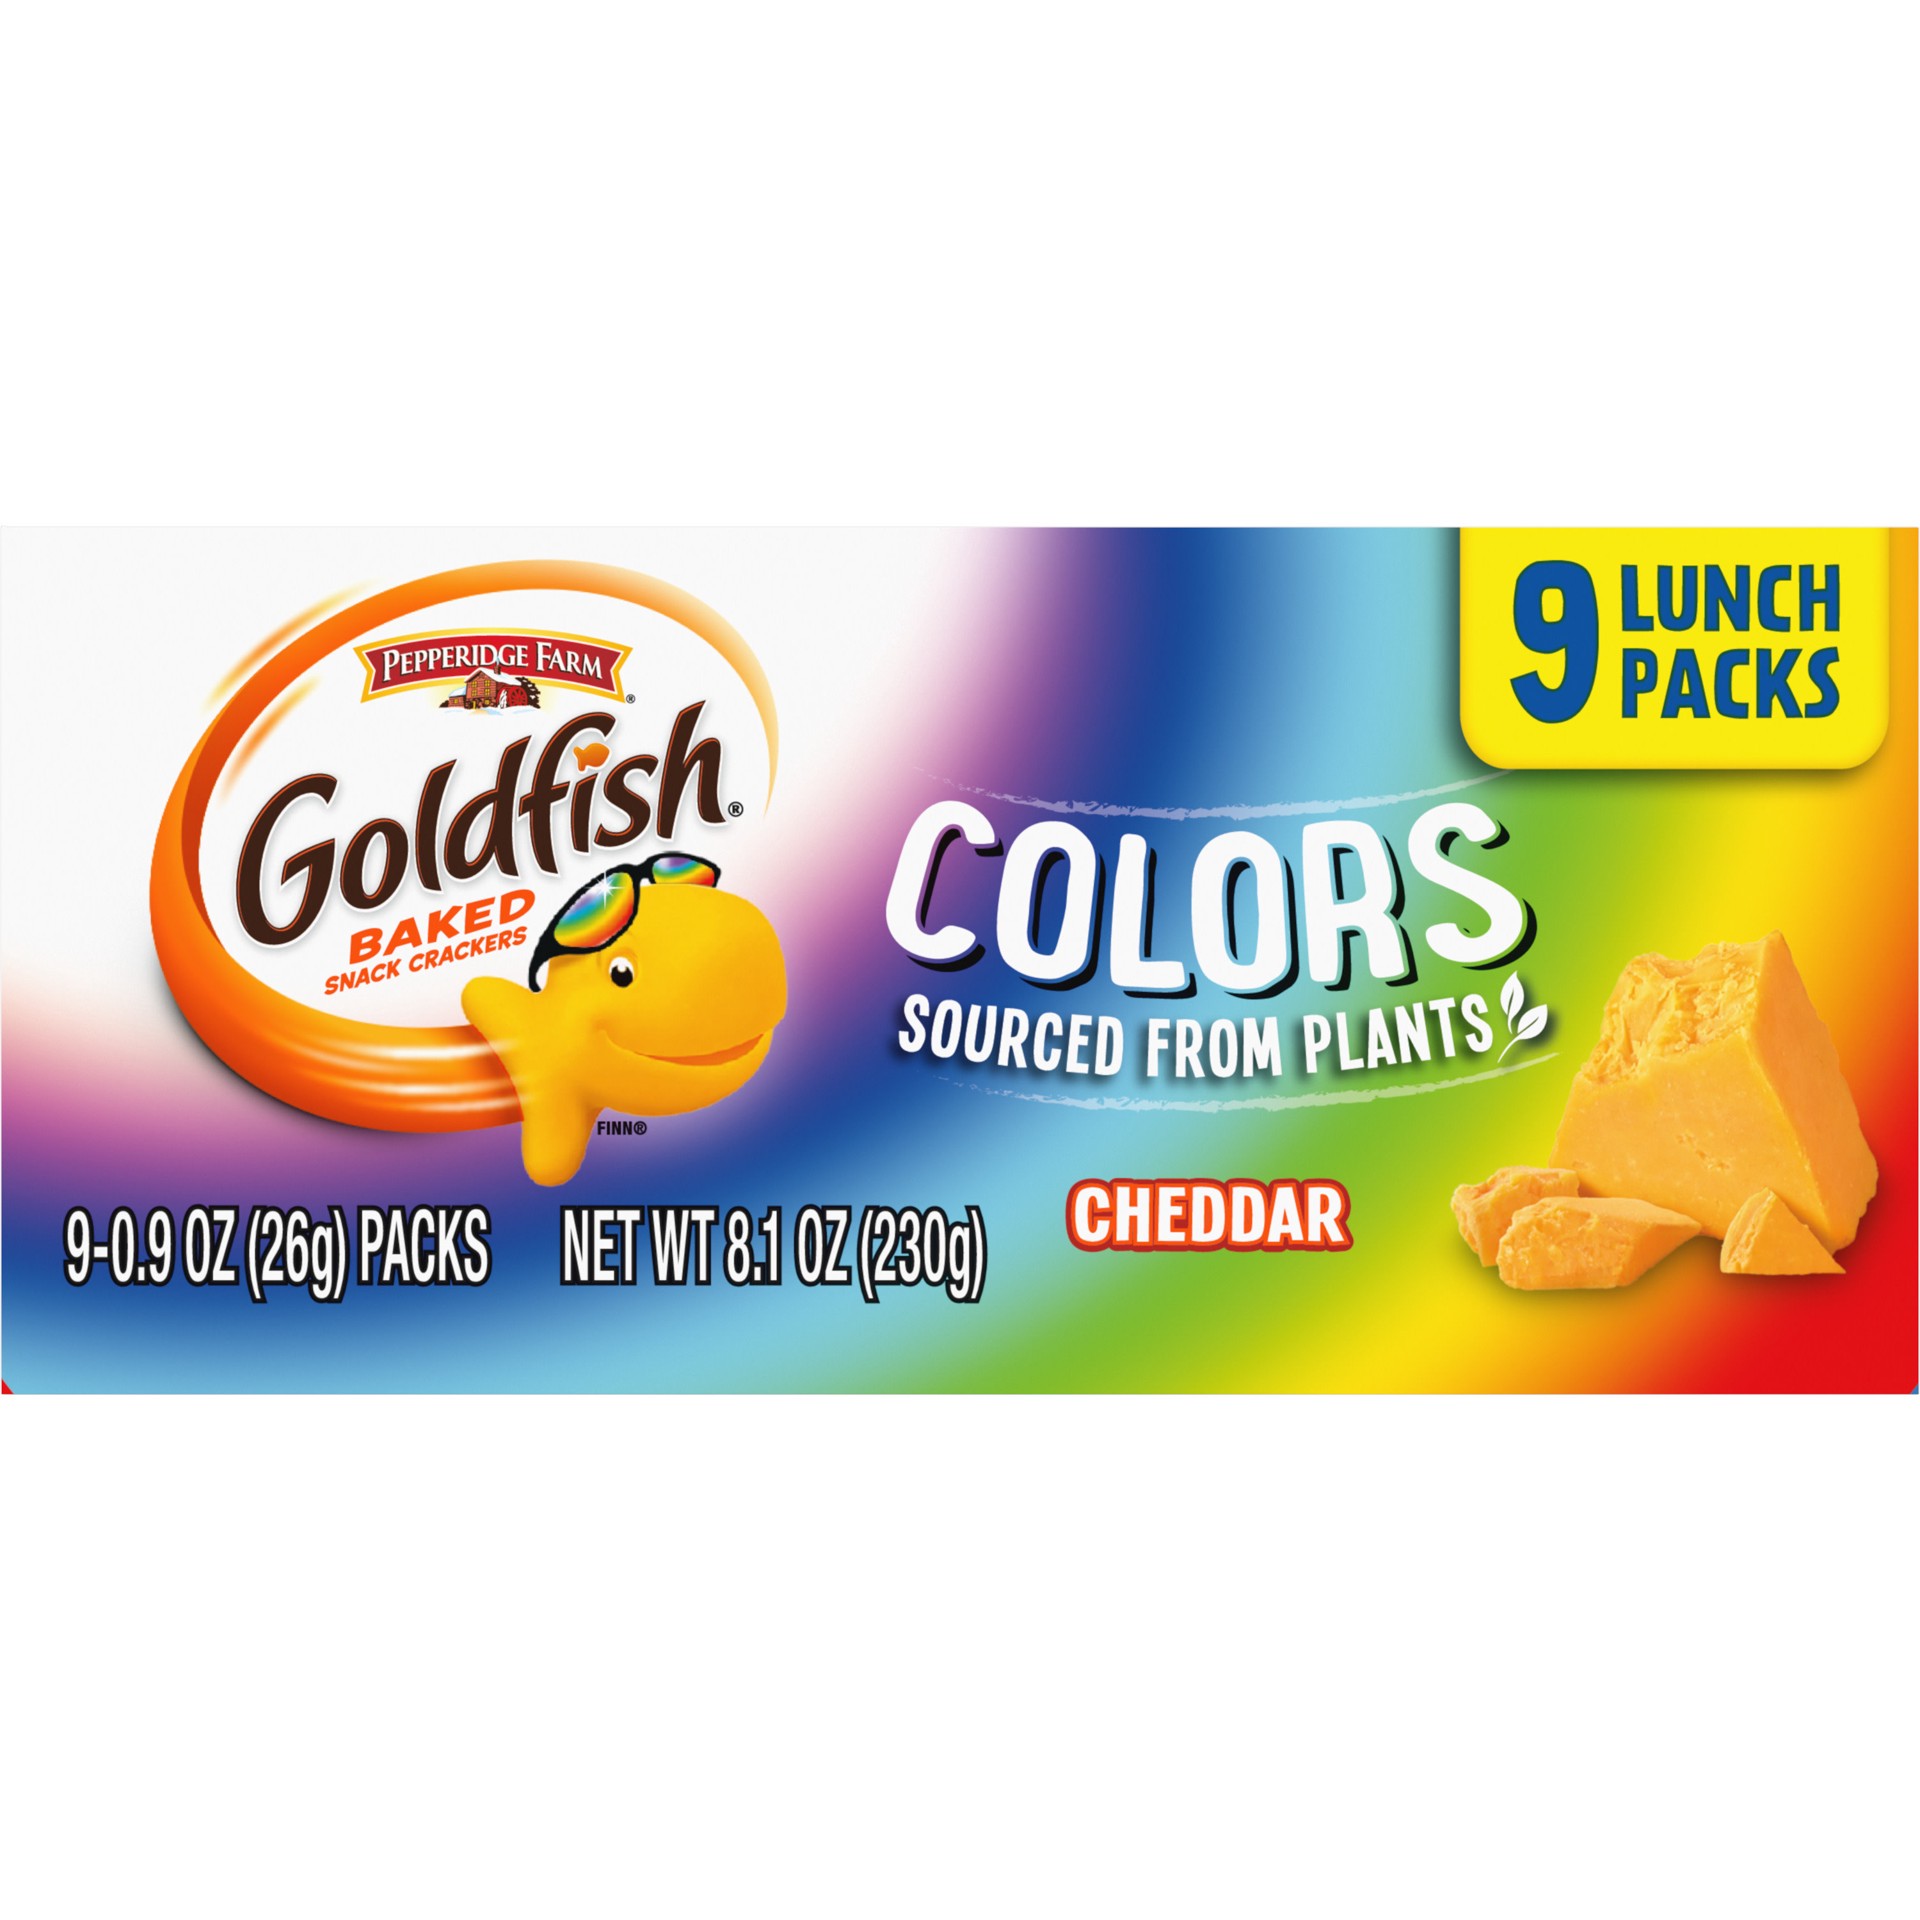 slide 8 of 9, Pepperidge Farm Goldfish Colors Cheddar Crackers, Snack Pack, 0.9 oz, 9 CT Multi-Pack Tray, 0.9 oz